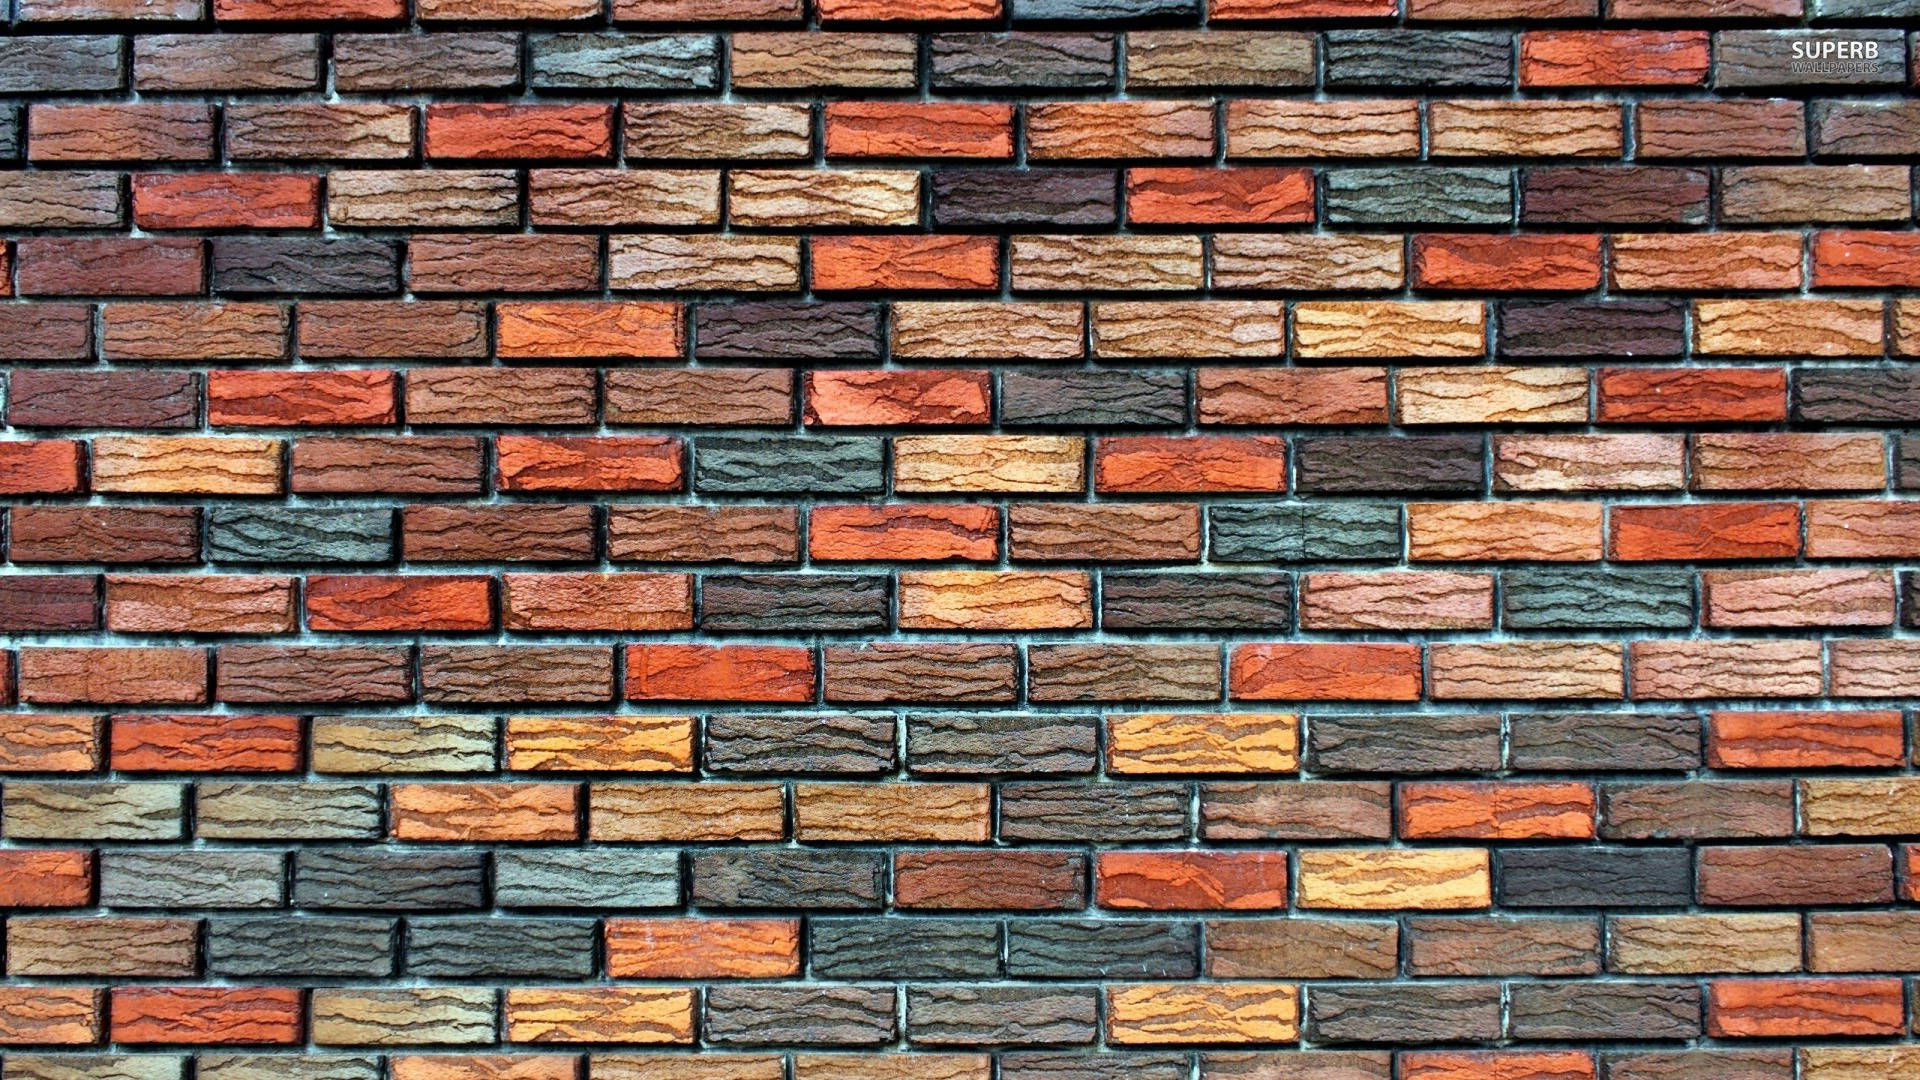 Vibrant Colored Brick Wall with Unique Squiggly Texture Wallpaper